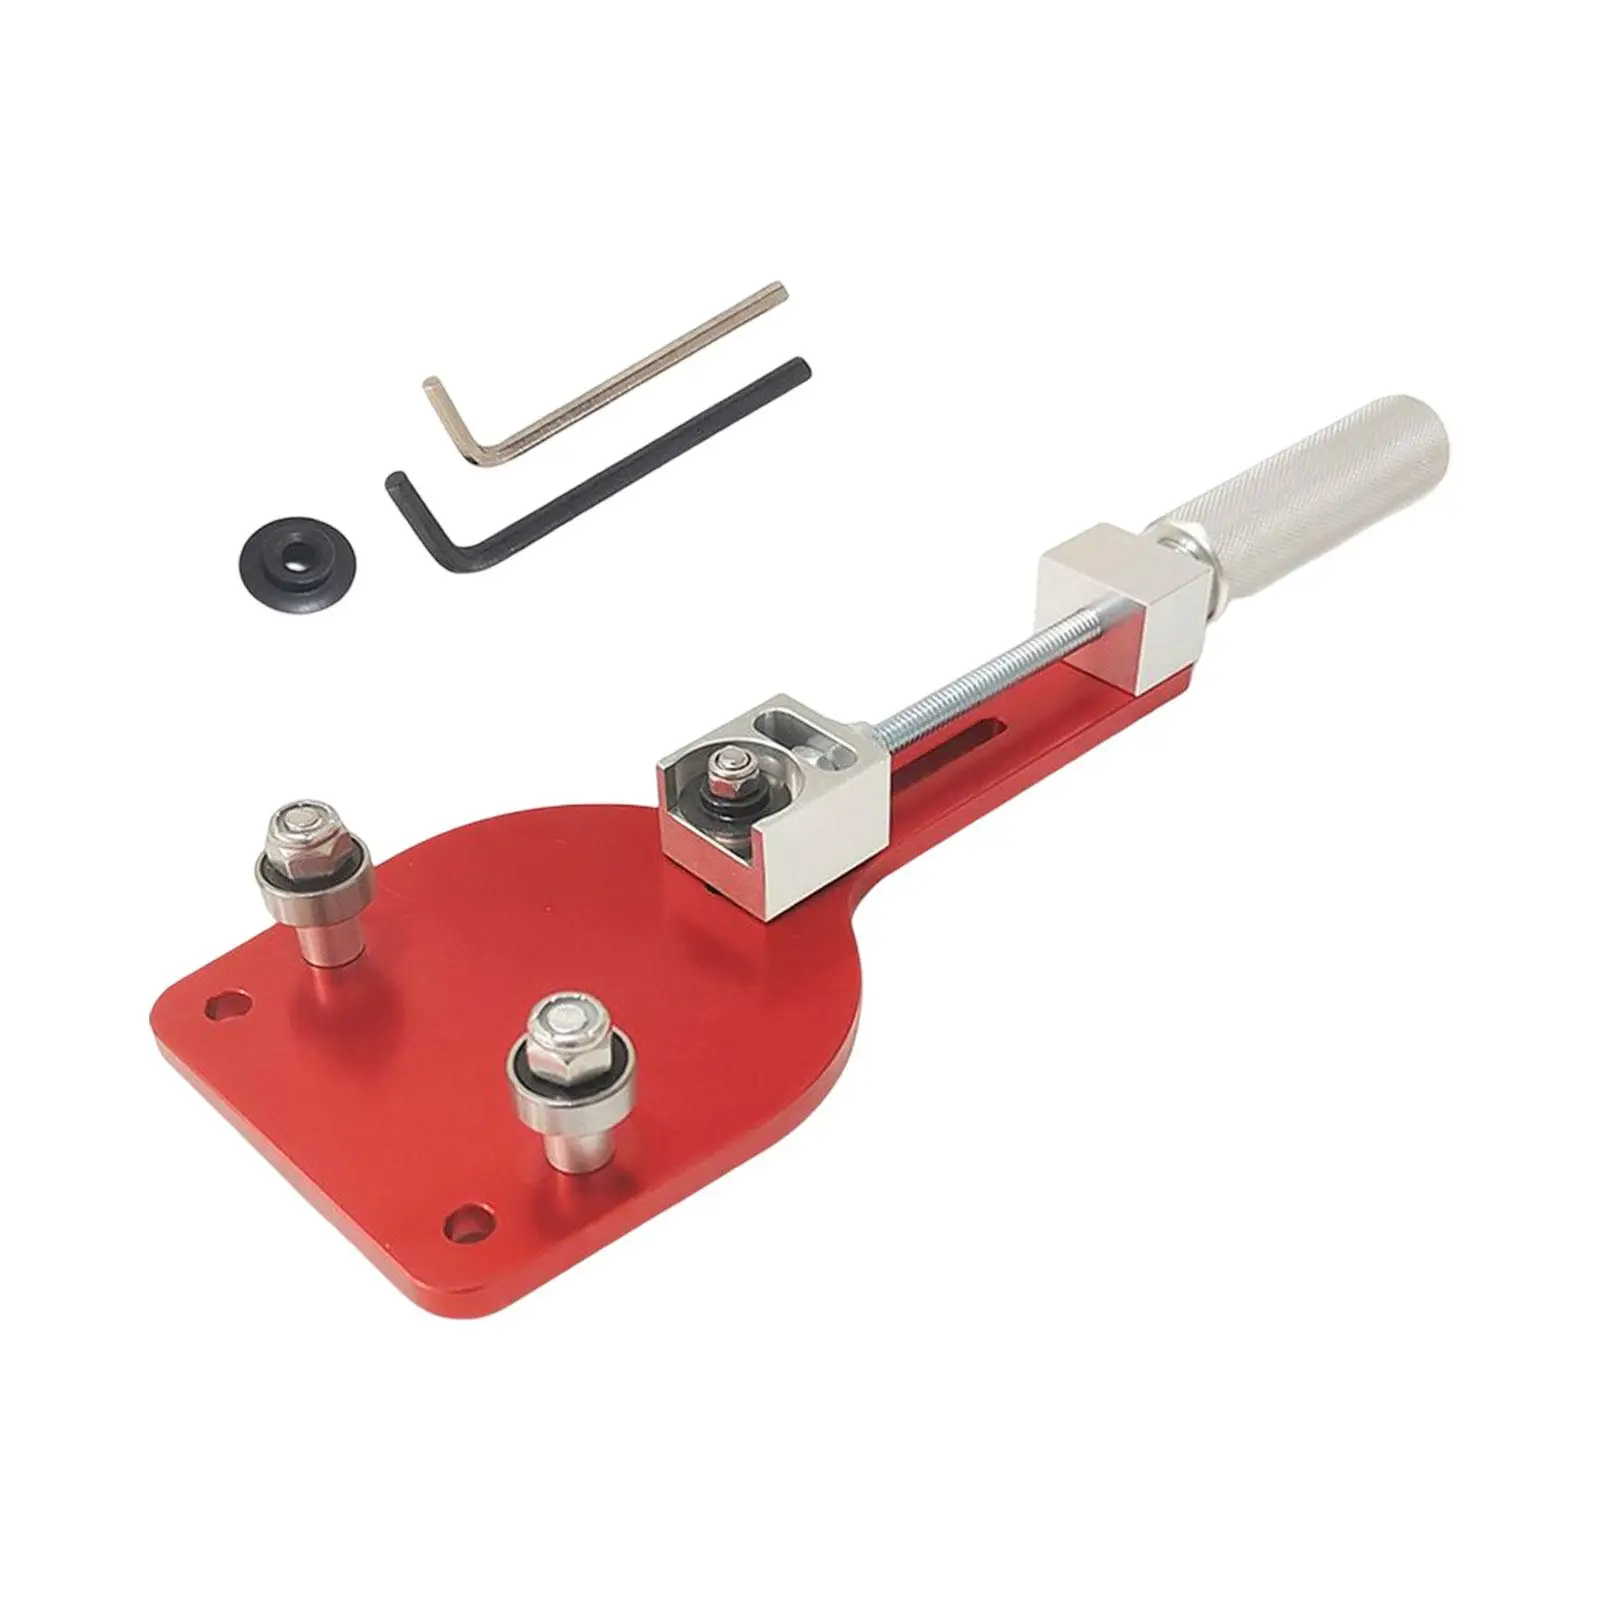 Oil Filter Cutter 77750 Aluminum Alloy Replace Tool Inspection Tool Red